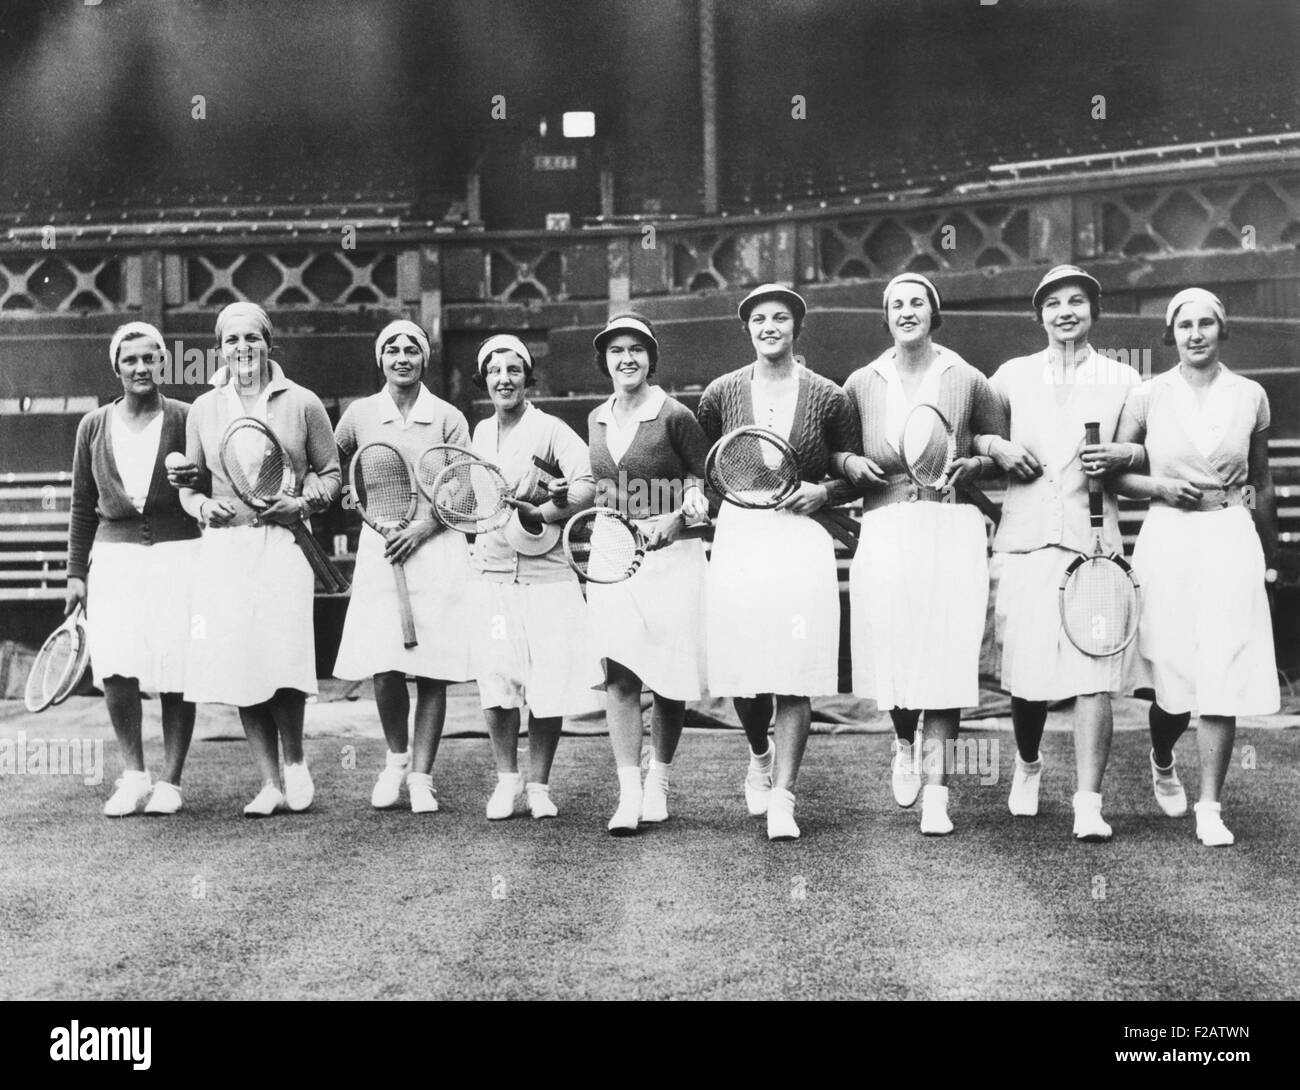 Wightman Cup teams at Wimbledon during a practice session on June 17, 1932. L-R: Helen Jacobs; Betty Nuthall; Anna McCune Harper; Phyllis Mudford King; Sarah Palfrey; Eileen Bennett Whittingstall; Peggy Saunders Mitchell; Helen Wills Moody; Dorothy Round. The Wightman Cup was an annual team tennis competition for women from the United States and Great Britain, 1923-1989. (CSU 2015 11 1579) Stock Photo